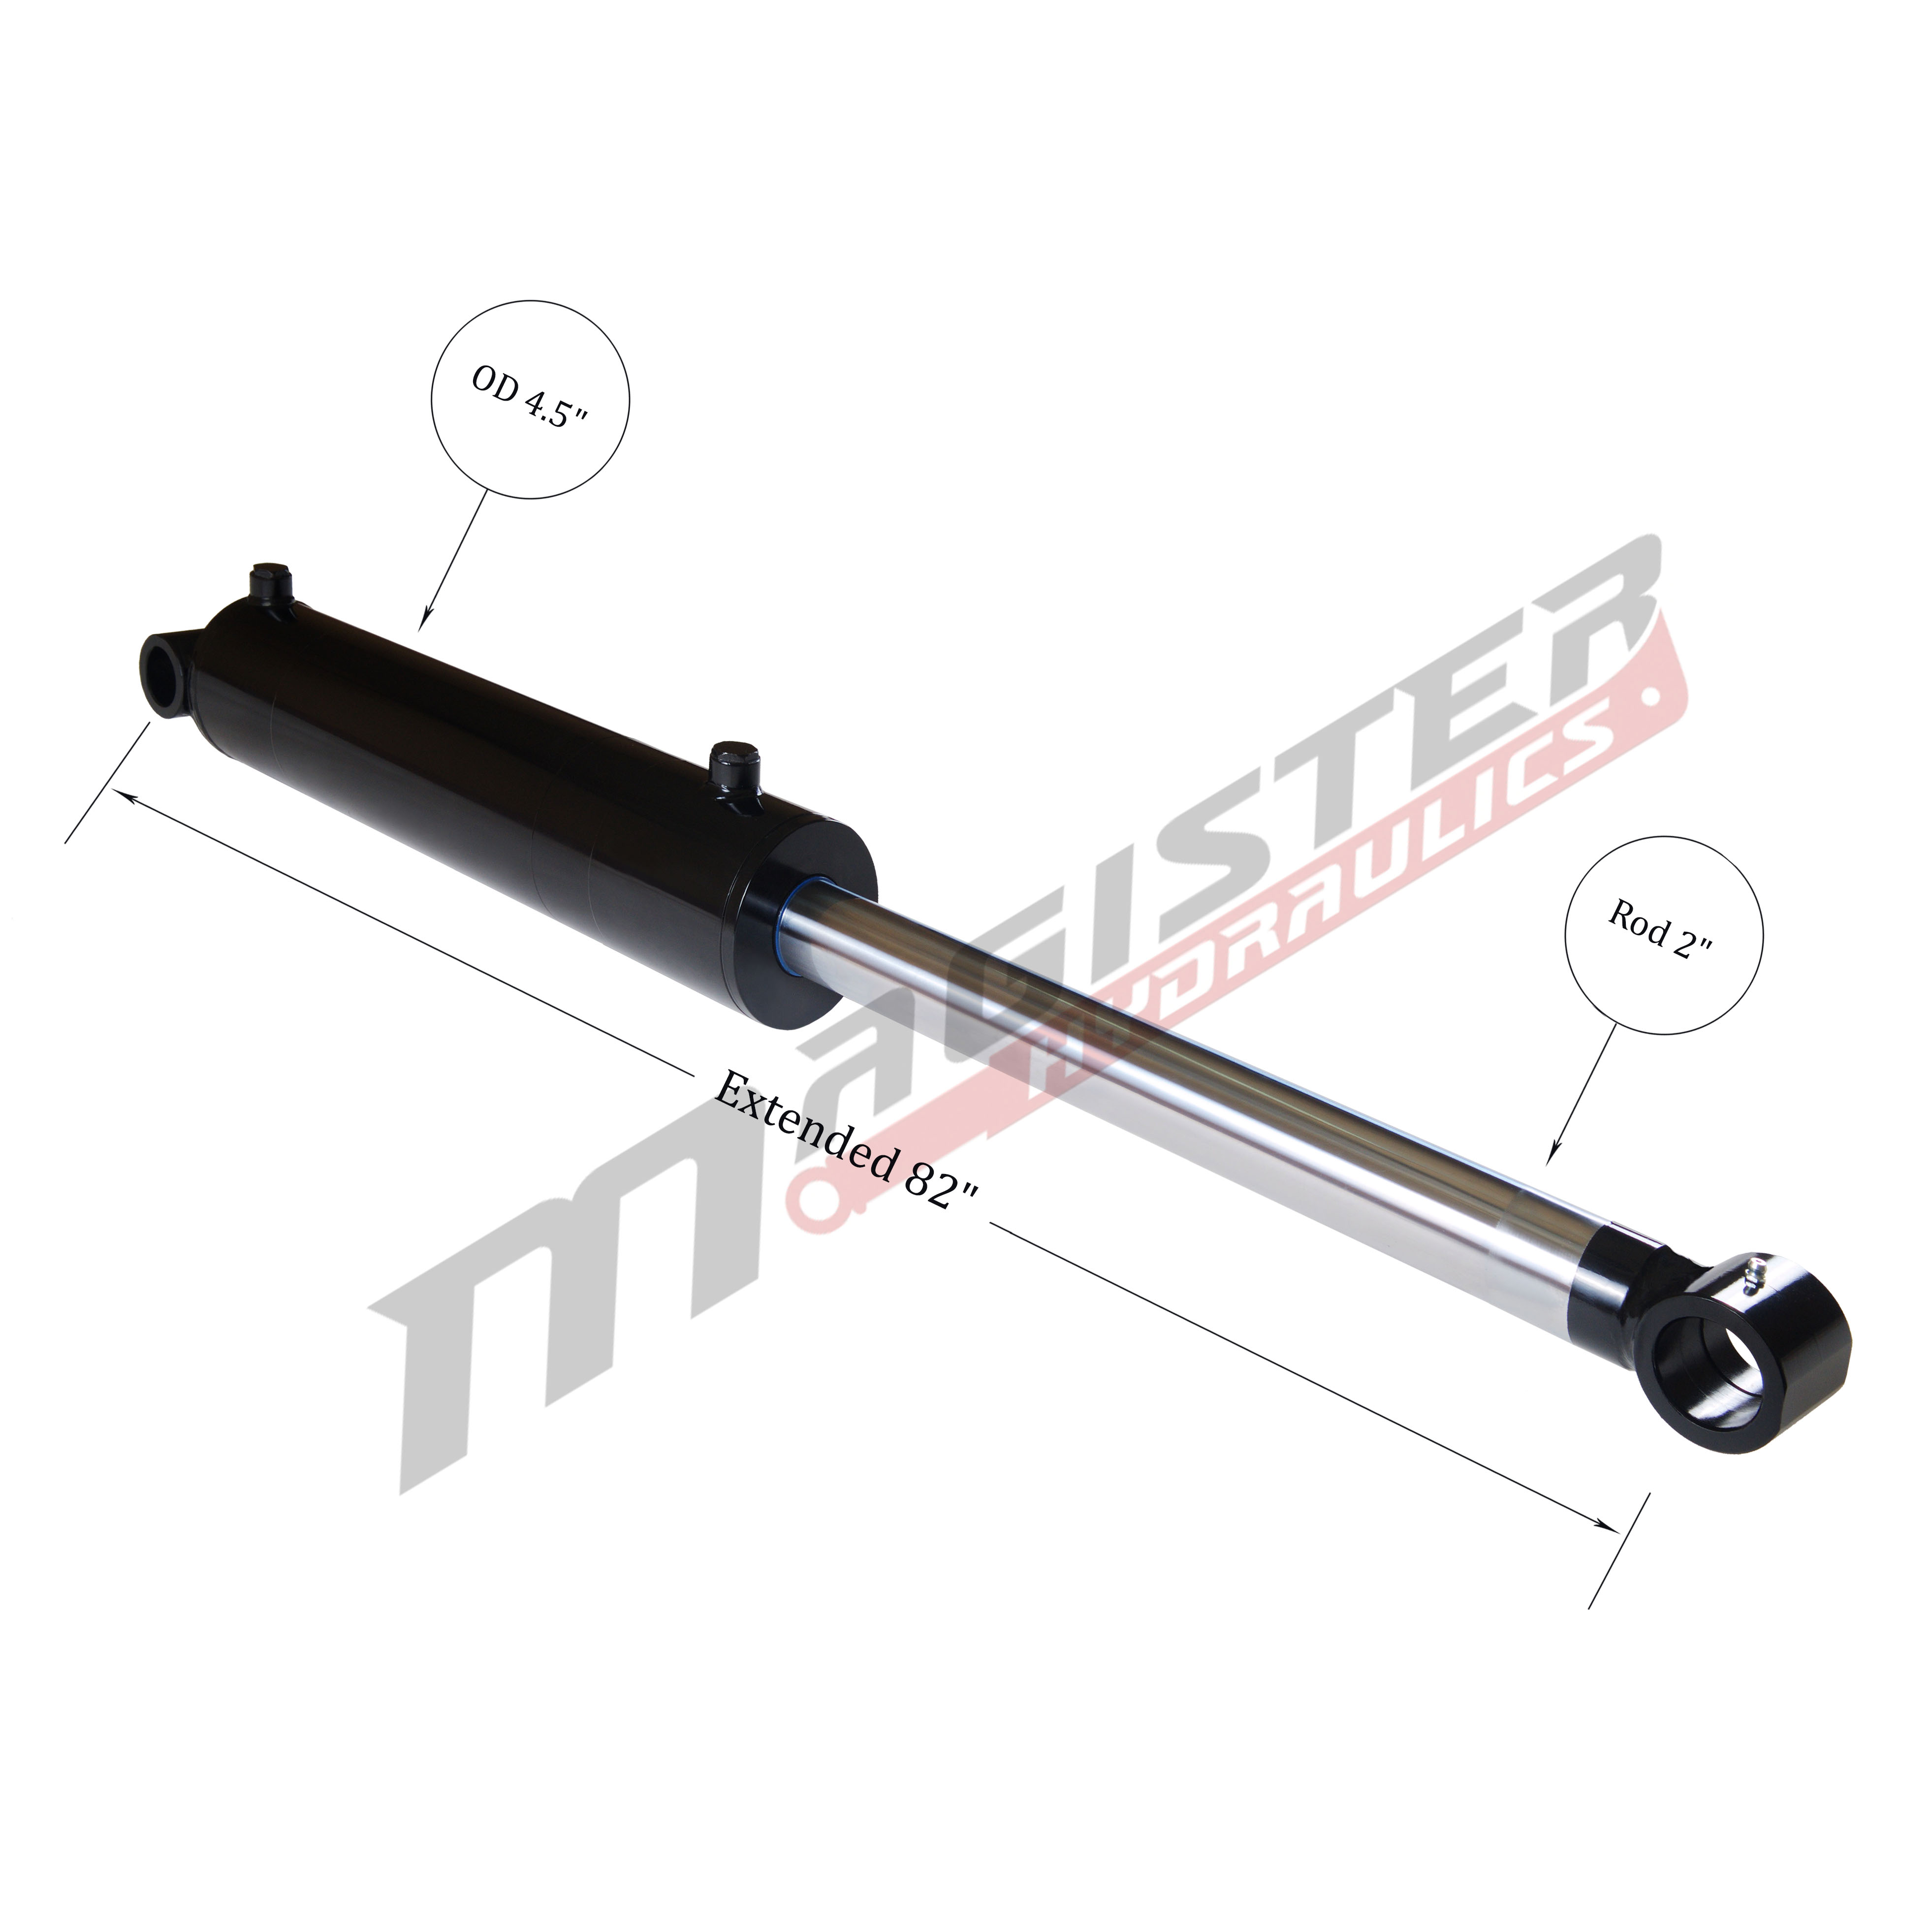 4 bore x 36 stroke hydraulic cylinder, welded cross tube double acting cylinder | Magister Hydraulics